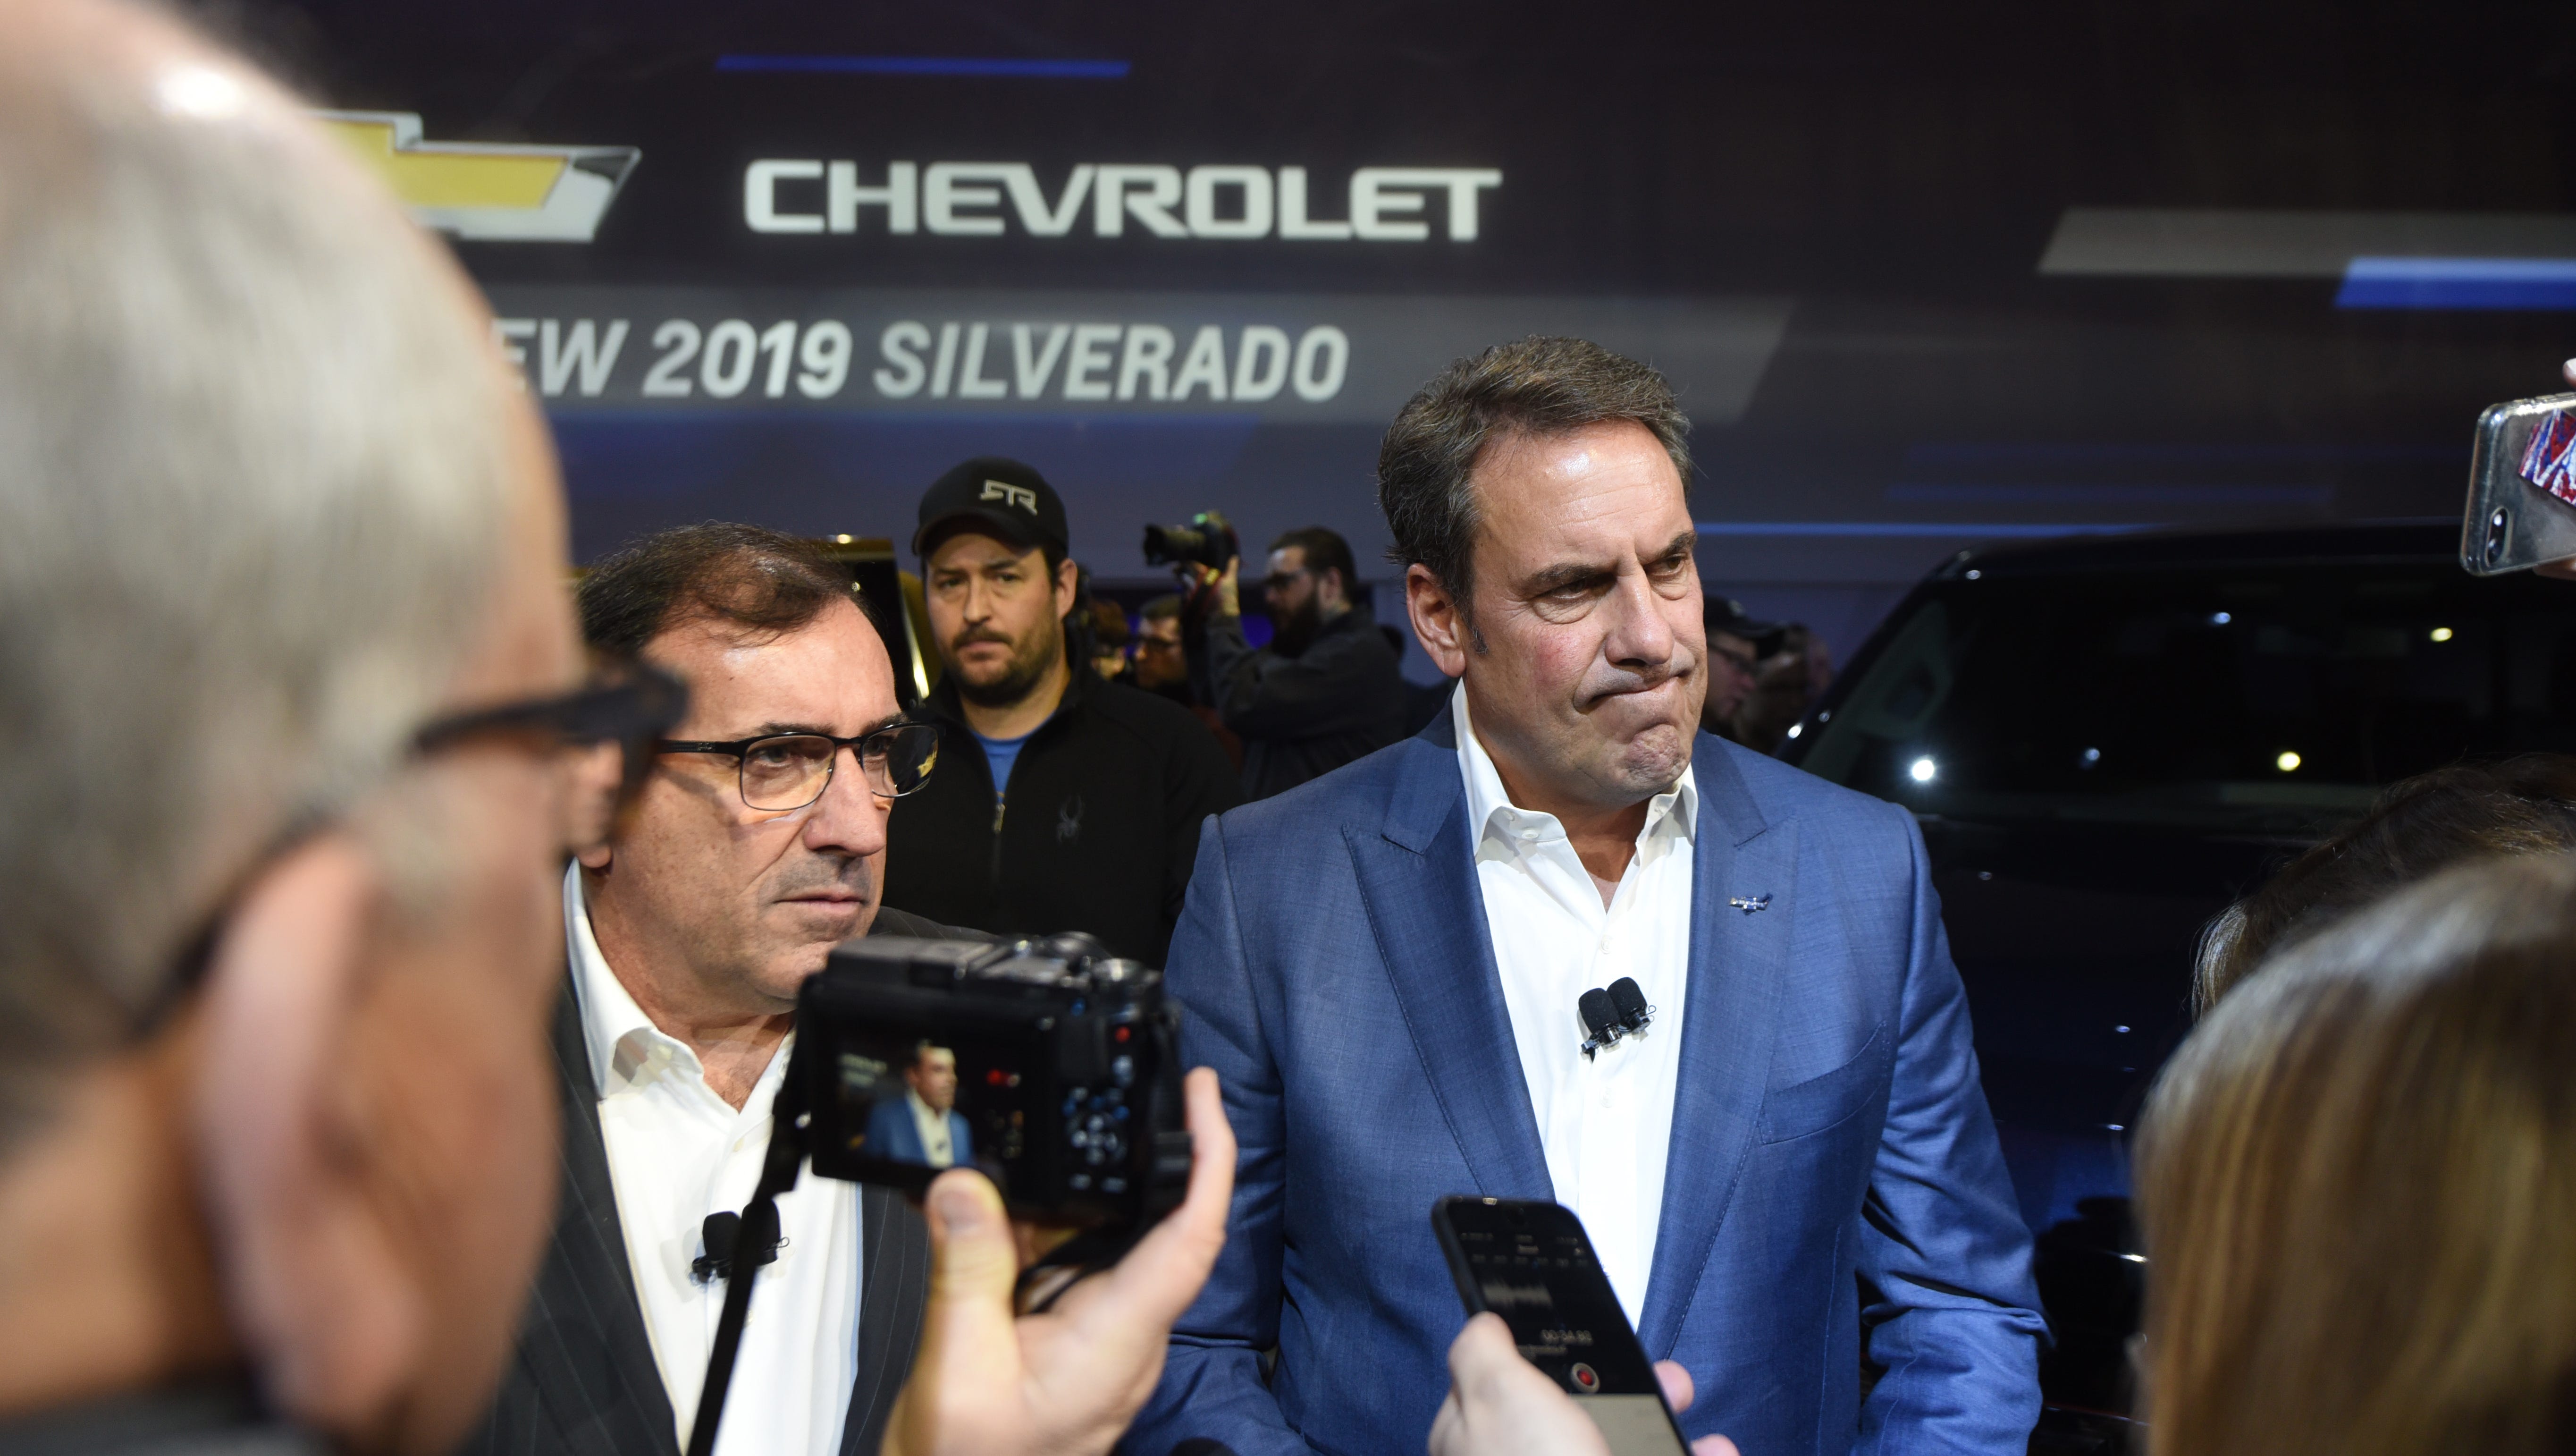 Mark Reuss (center), Executive VP Global Product Development, GM, and Alan Batey, President GM, North America, speak to the media after the Silverado's unveiling.